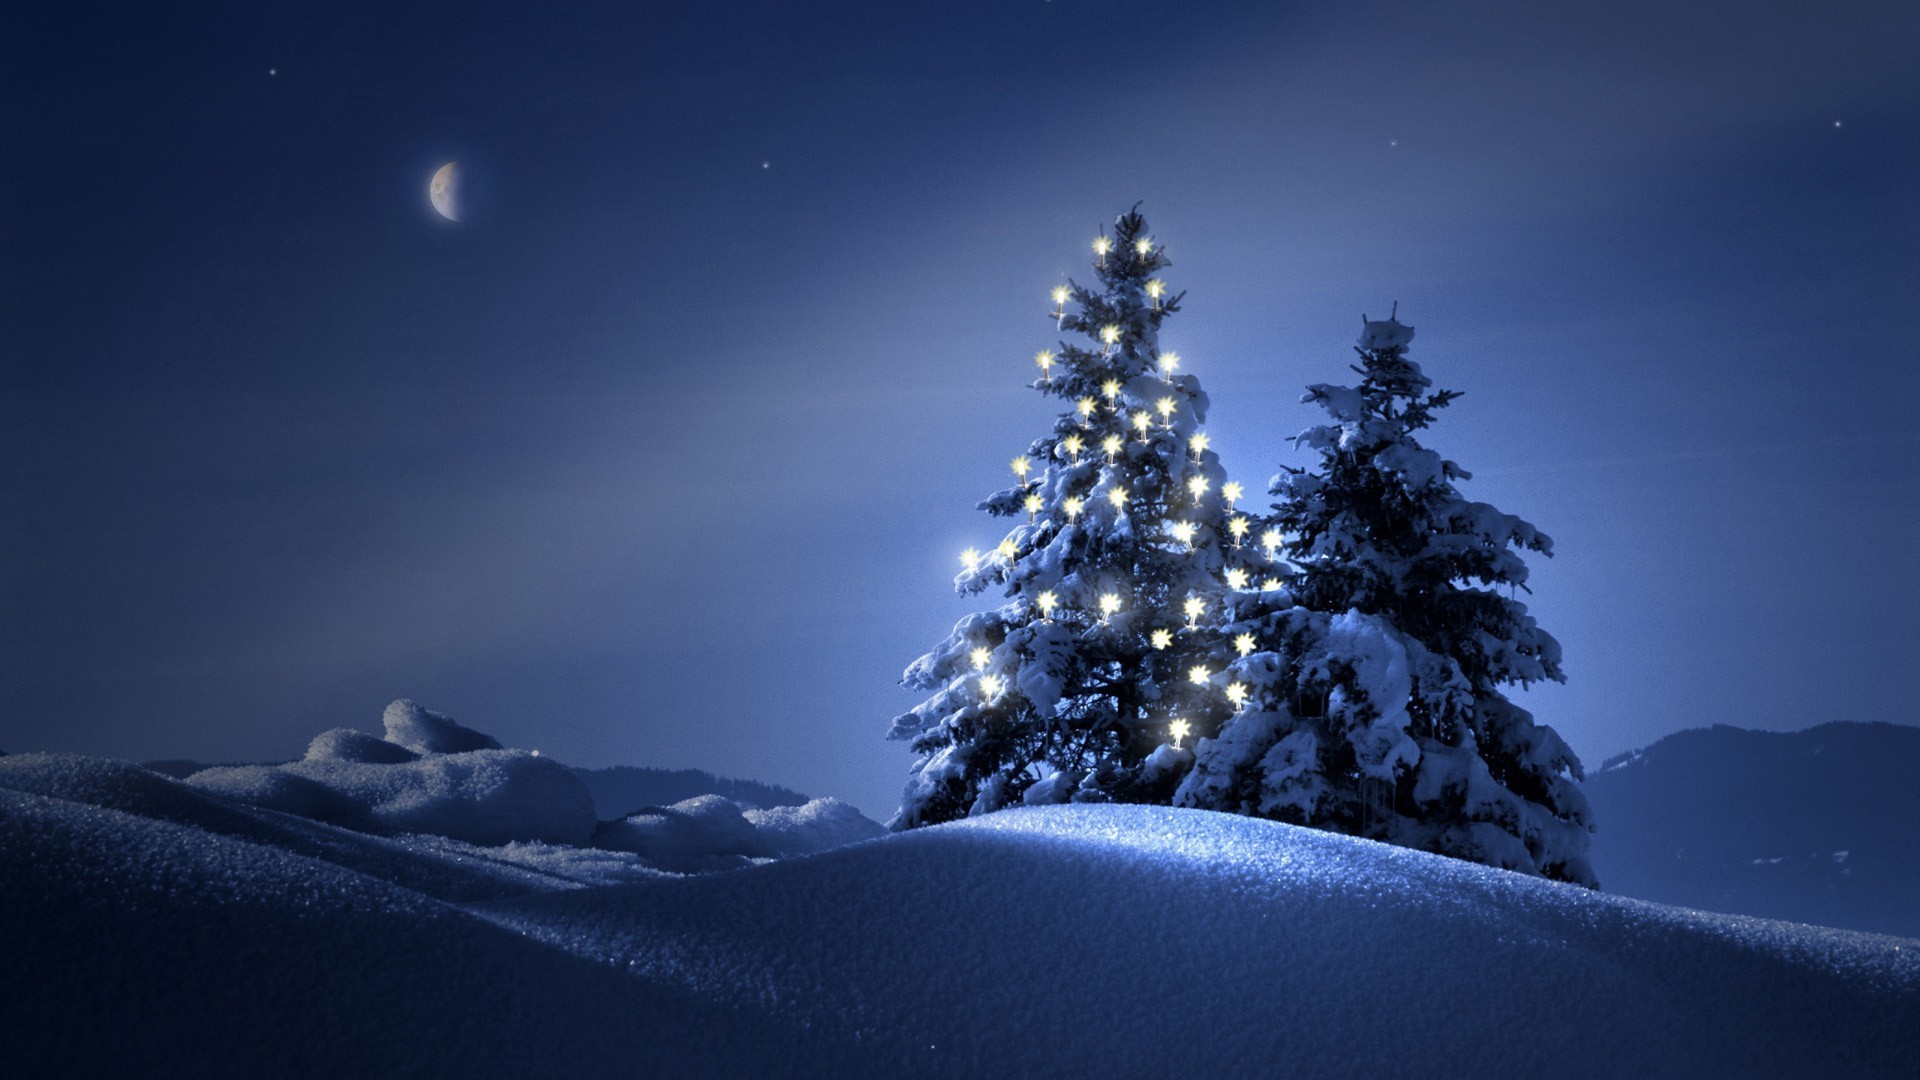 Snowy Christmas Backgrounds 48 images